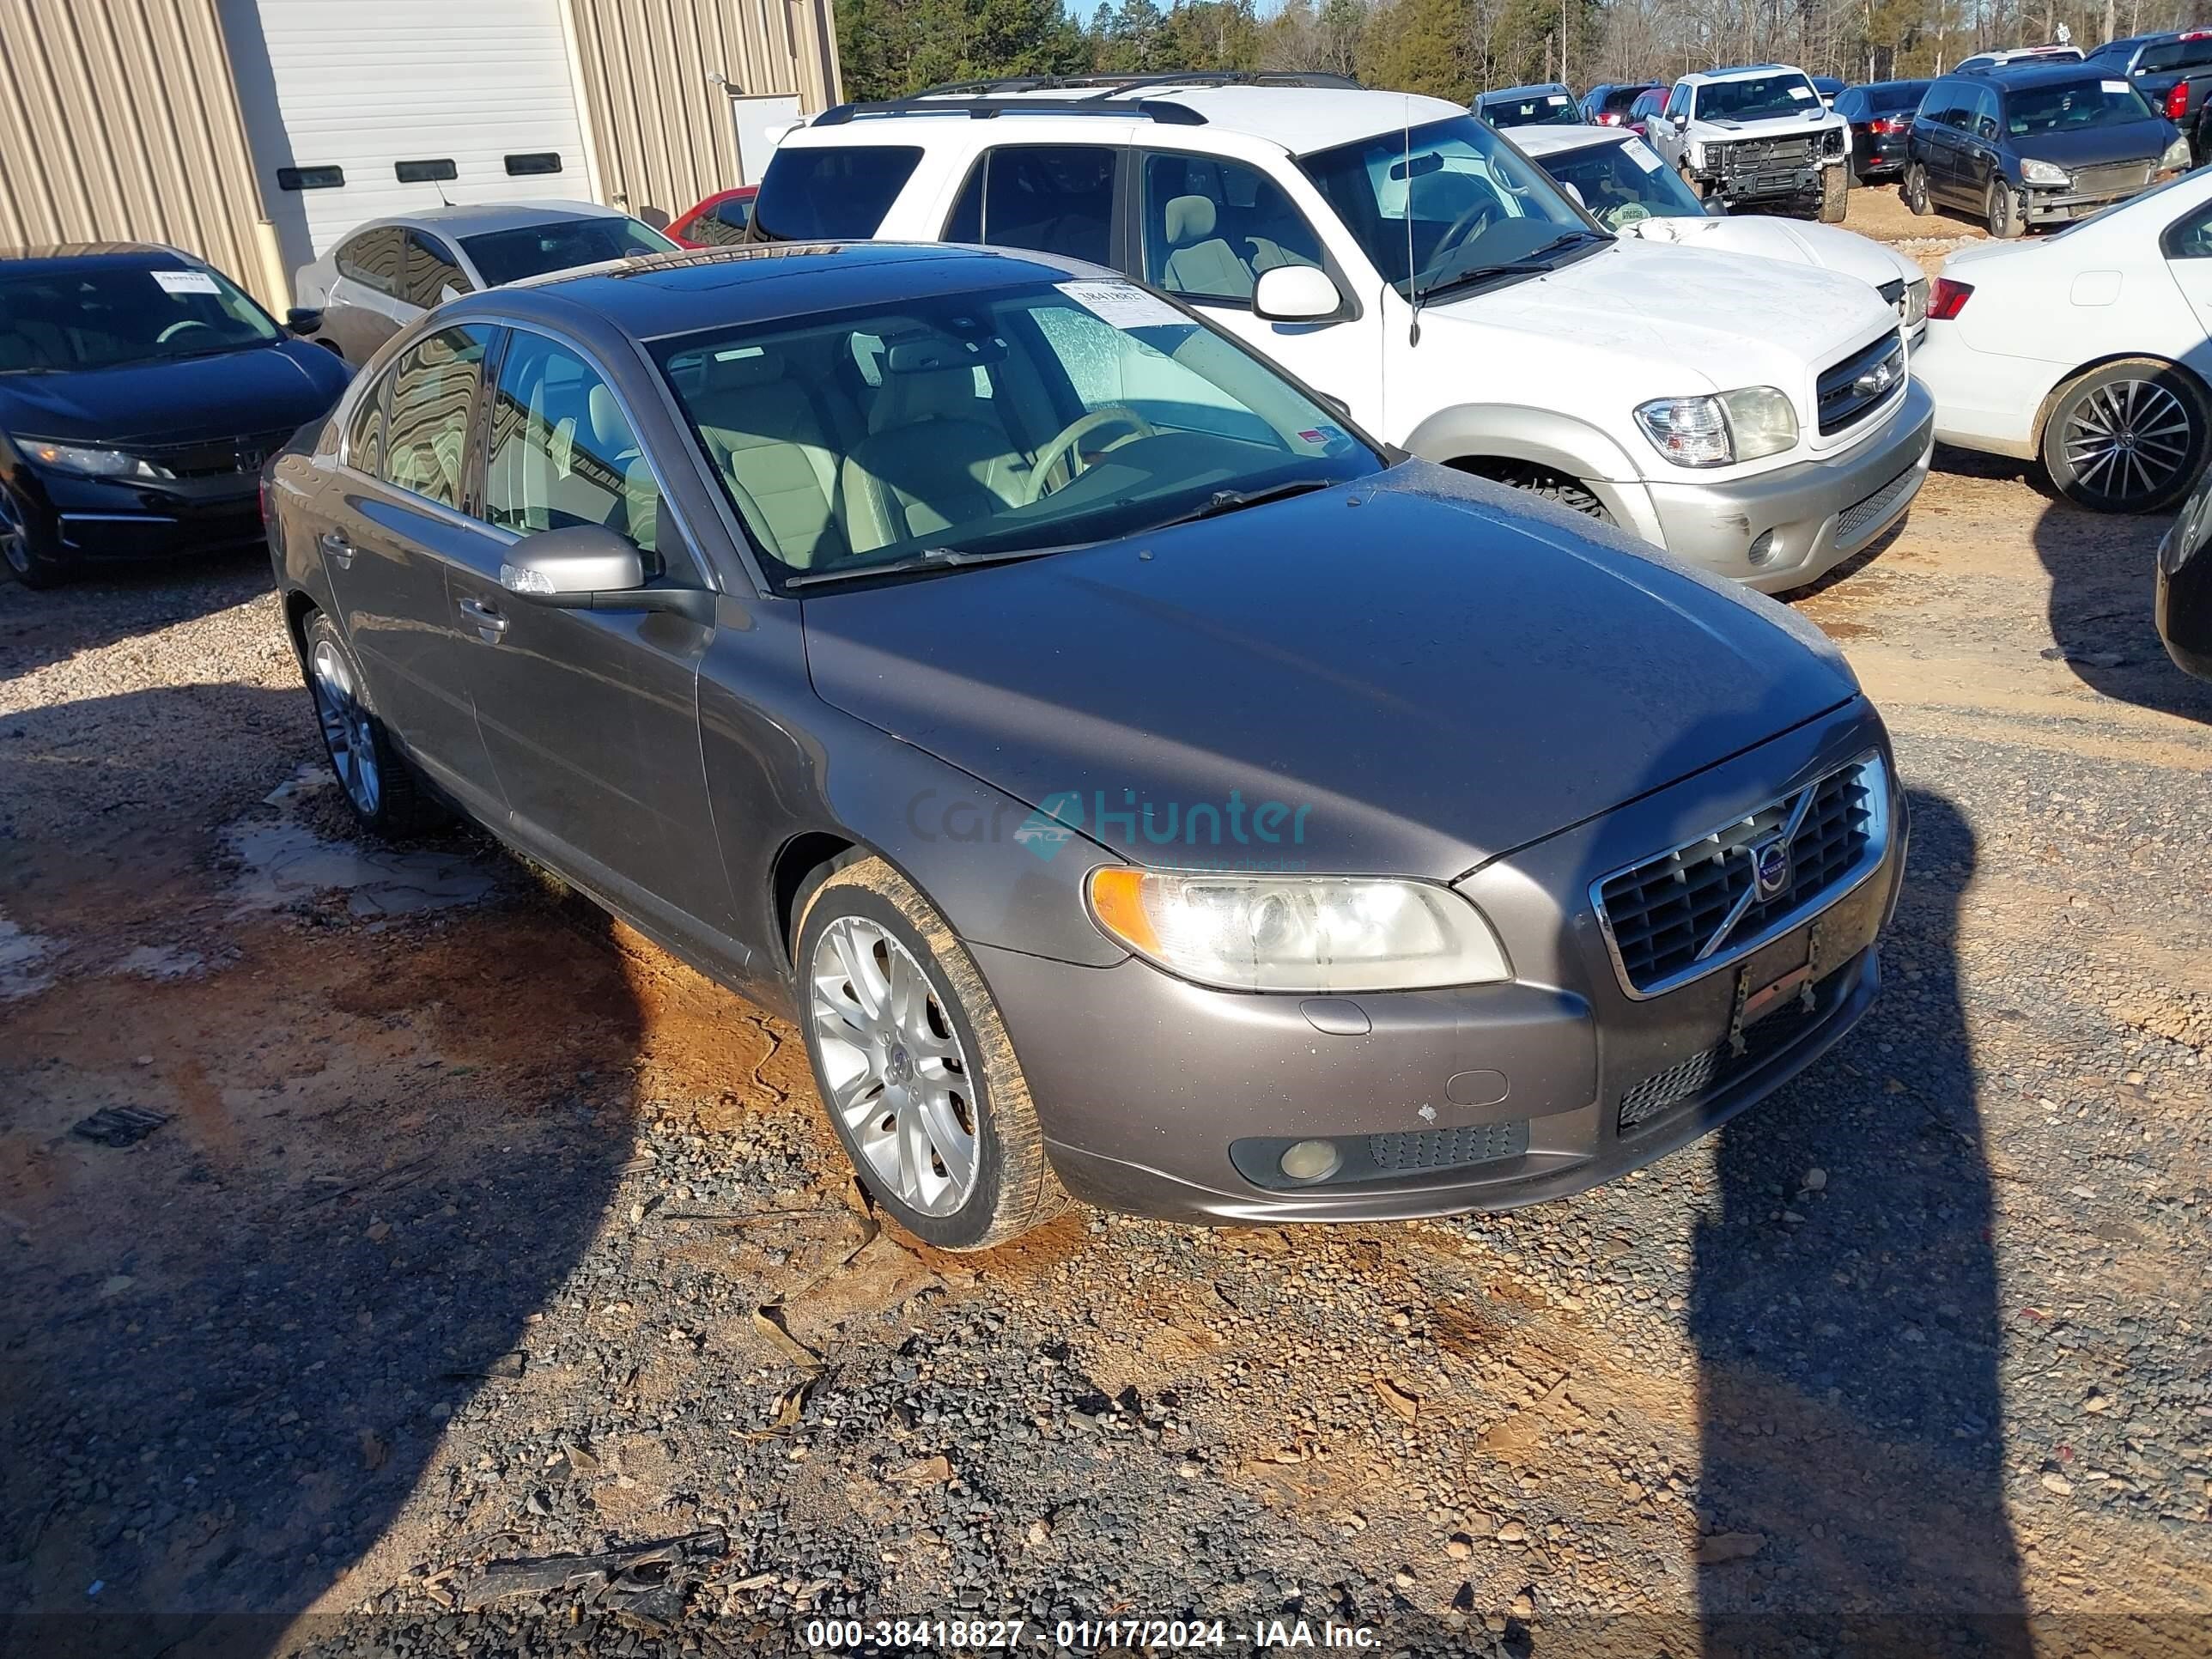 volvo s80 2007 yv1as982271027157